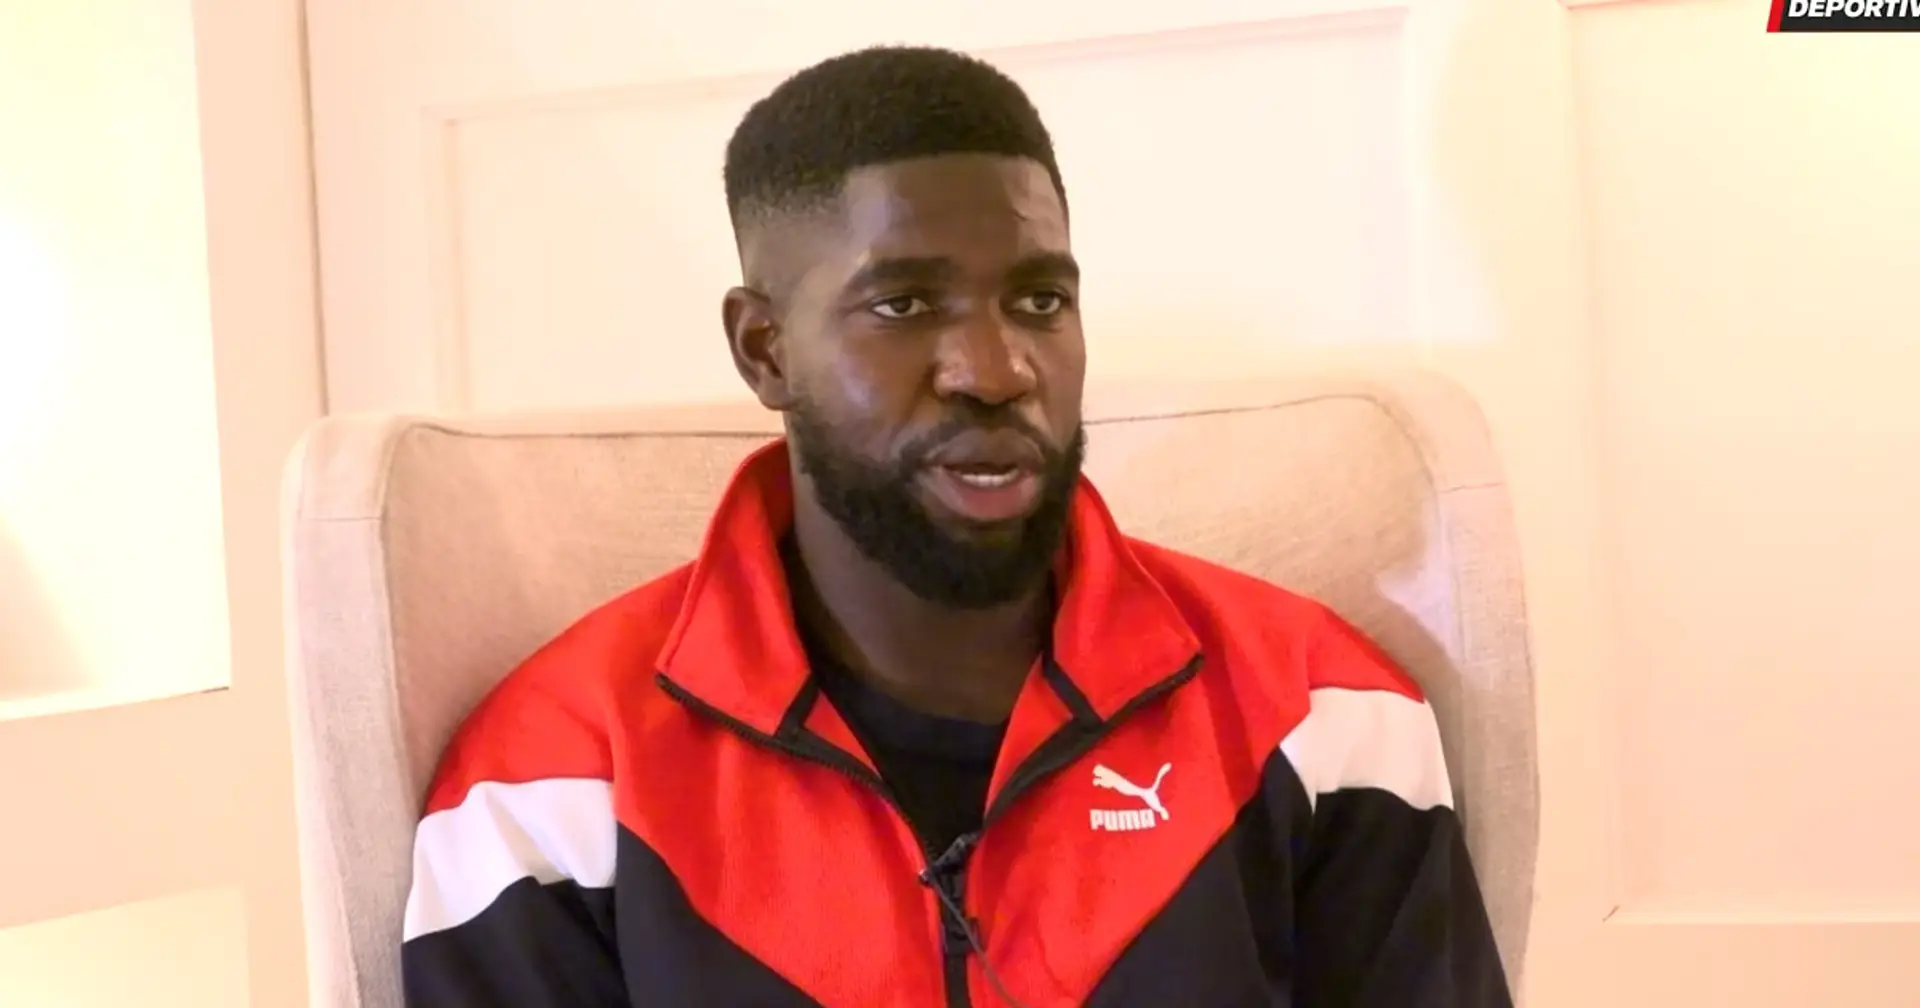 'I don't see myself at another club': Umtiti rules out January exit despite lack of playing time